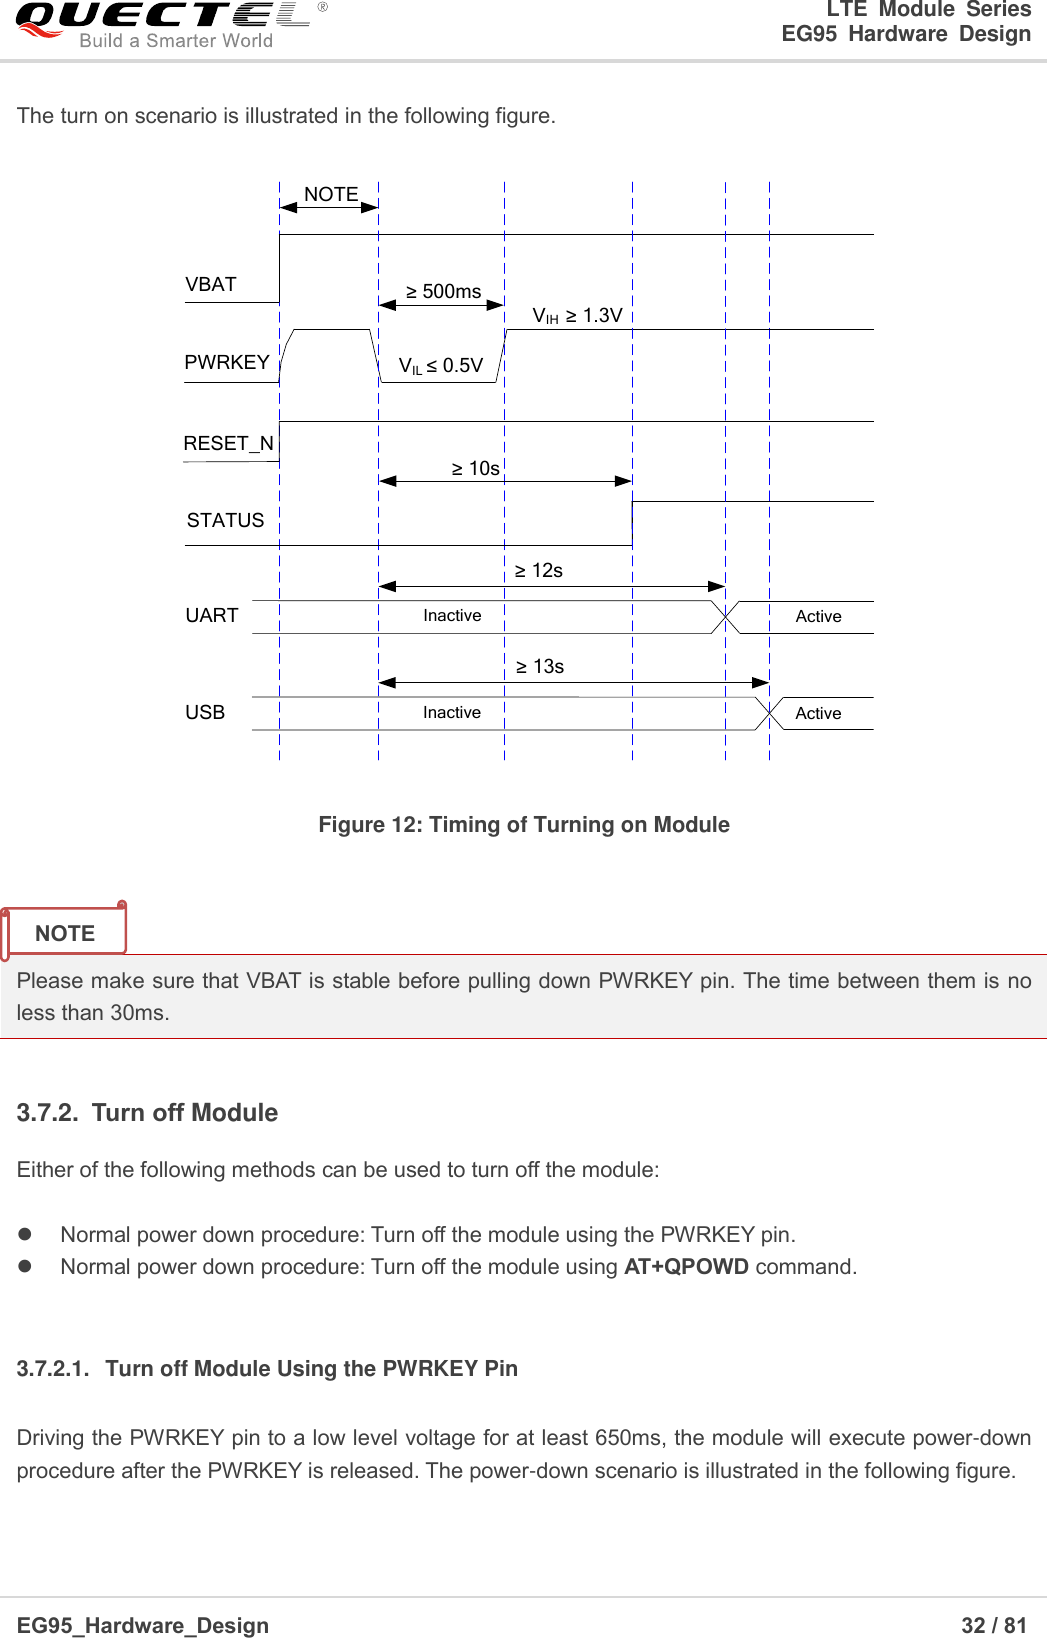 LTE  Module  Series                                                  EG95  Hardware  Design  EG95_Hardware_Design                                                                   32 / 81    The turn on scenario is illustrated in the following figure. VIL ≤ 0.5VVIH  ≥ 1.3VVBATPWRKEY≥ 500msRESET_NSTATUSInactive ActiveUARTNOTEInactive ActiveUSB≥ 10s≥ 12s≥ 13s Figure 12: Timing of Turning on Module   Please make sure that VBAT is stable before pulling down PWRKEY pin. The time between them is no less than 30ms.  3.7.2.  Turn off Module Either of the following methods can be used to turn off the module:   Normal power down procedure: Turn off the module using the PWRKEY pin.  Normal power down procedure: Turn off the module using AT+QPOWD command.  3.7.2.1.  Turn off Module Using the PWRKEY Pin Driving the PWRKEY pin to a low level voltage for at least 650ms, the module will execute power-down procedure after the PWRKEY is released. The power-down scenario is illustrated in the following figure. NOTE 